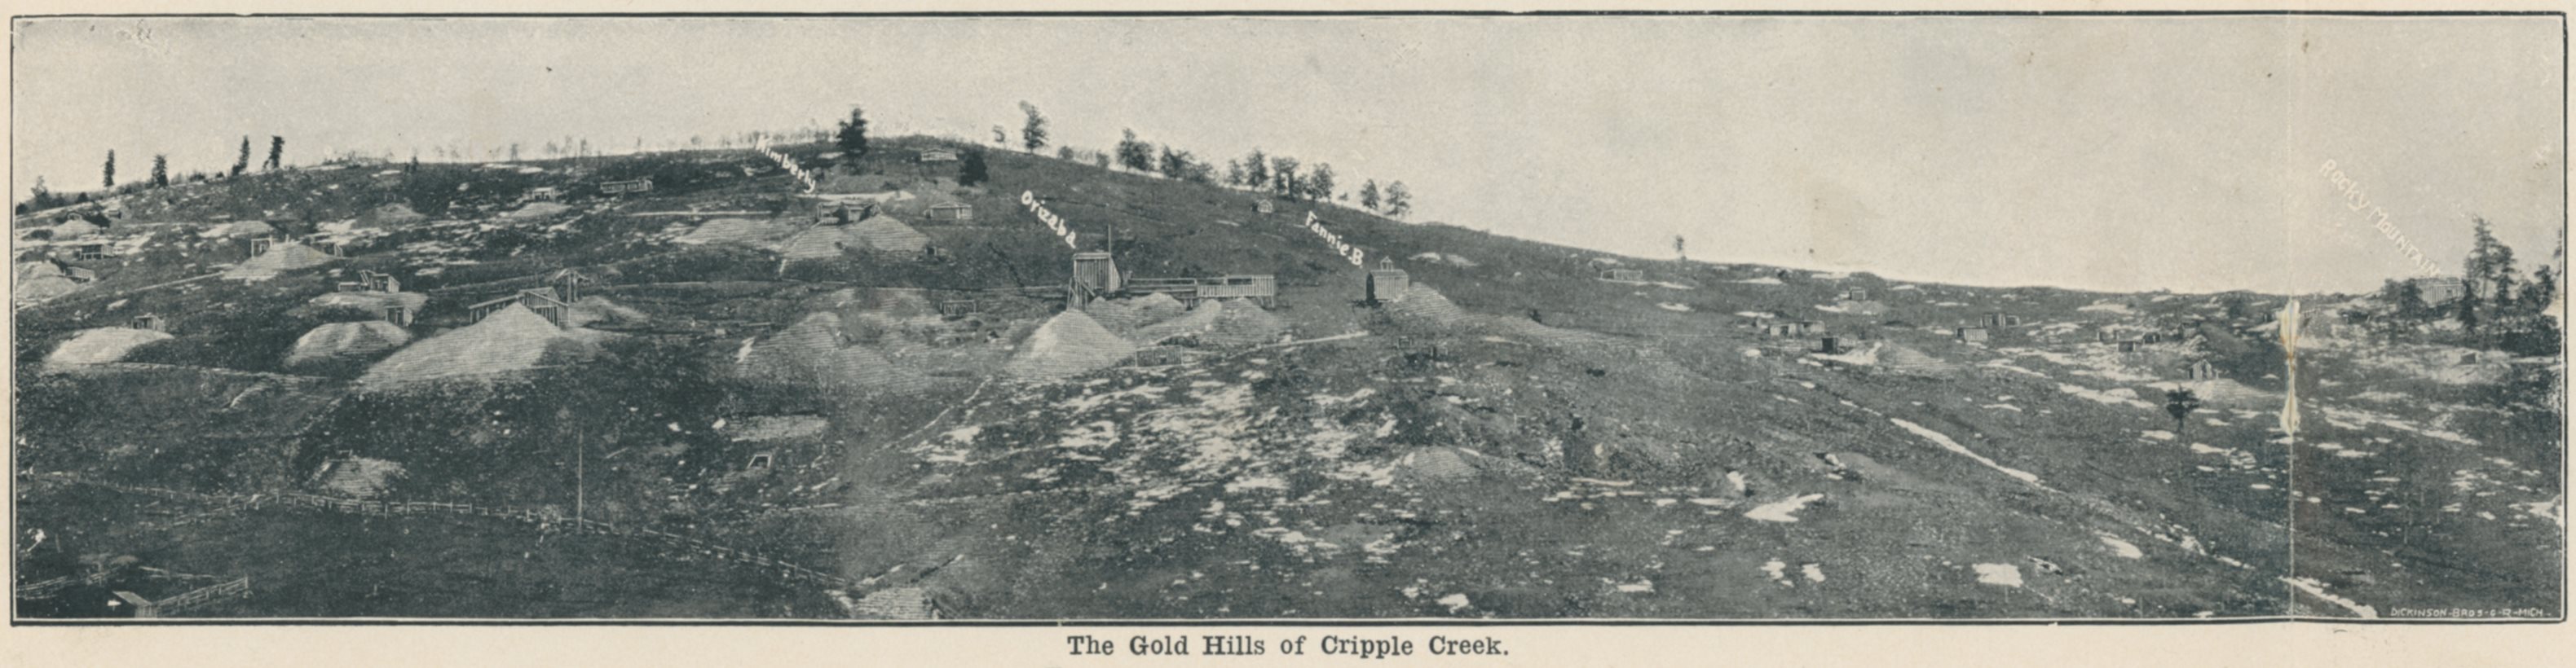 The Gold Hills of Cripple Creek. [Northwest Slope of Beacon Hill]